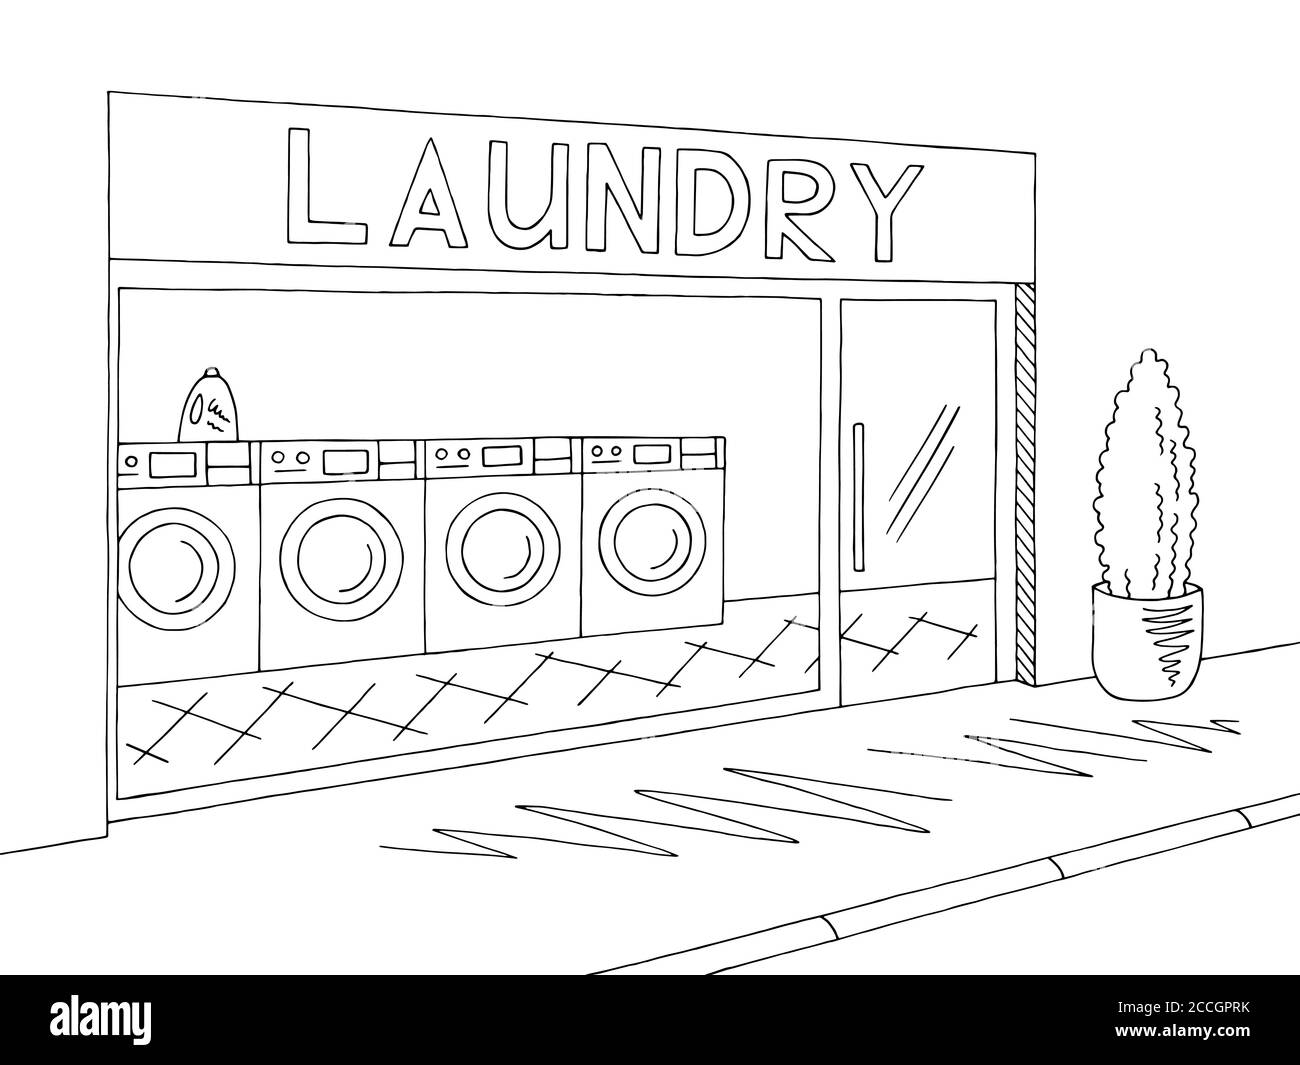 Laundry exterior graphic black white sketch illustration vector Stock Vector